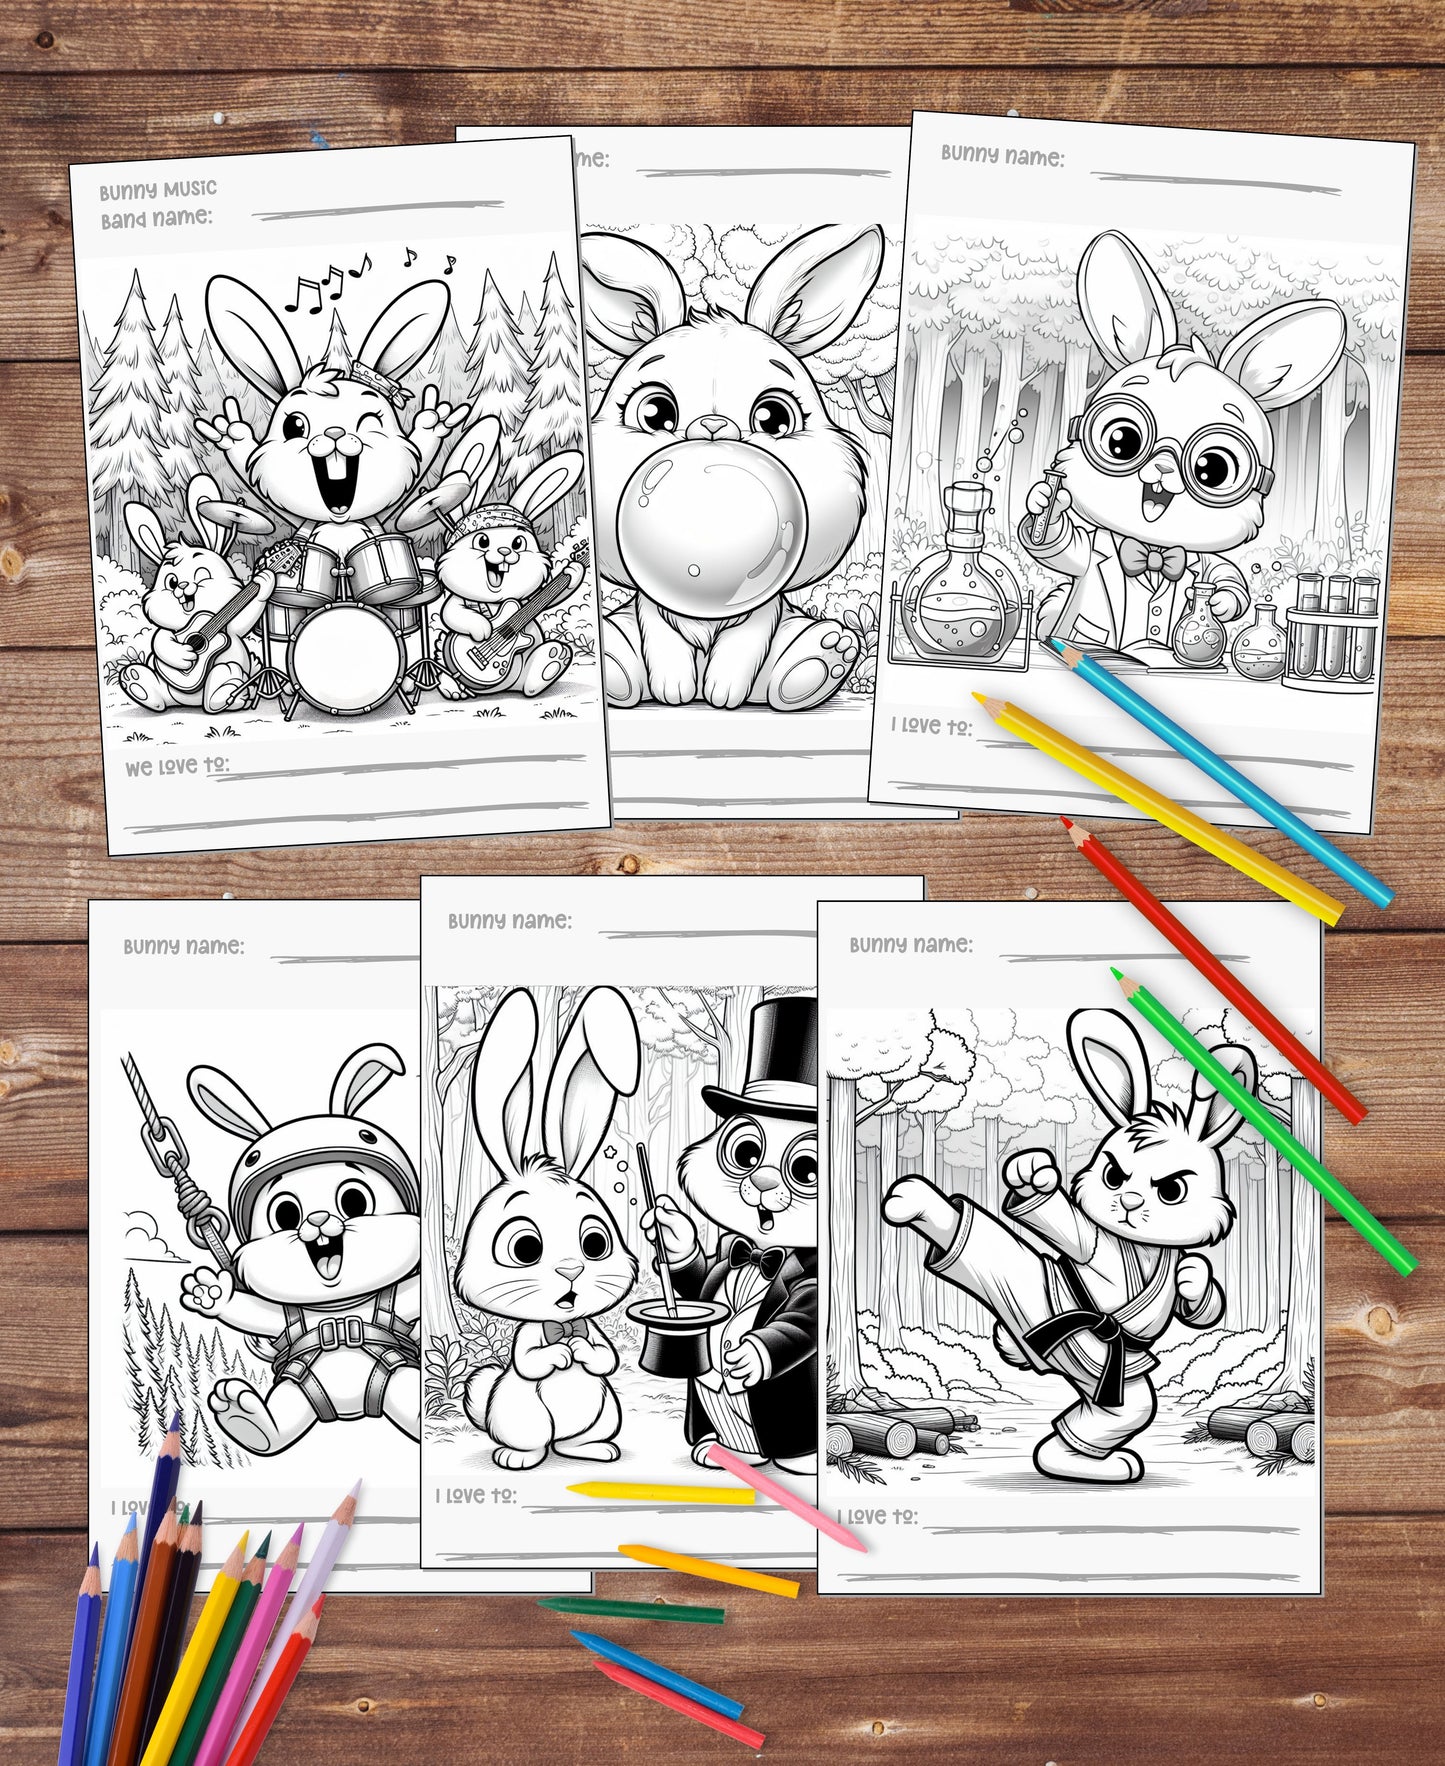 110 Funny Bunnies Colouring Pages - Digital File